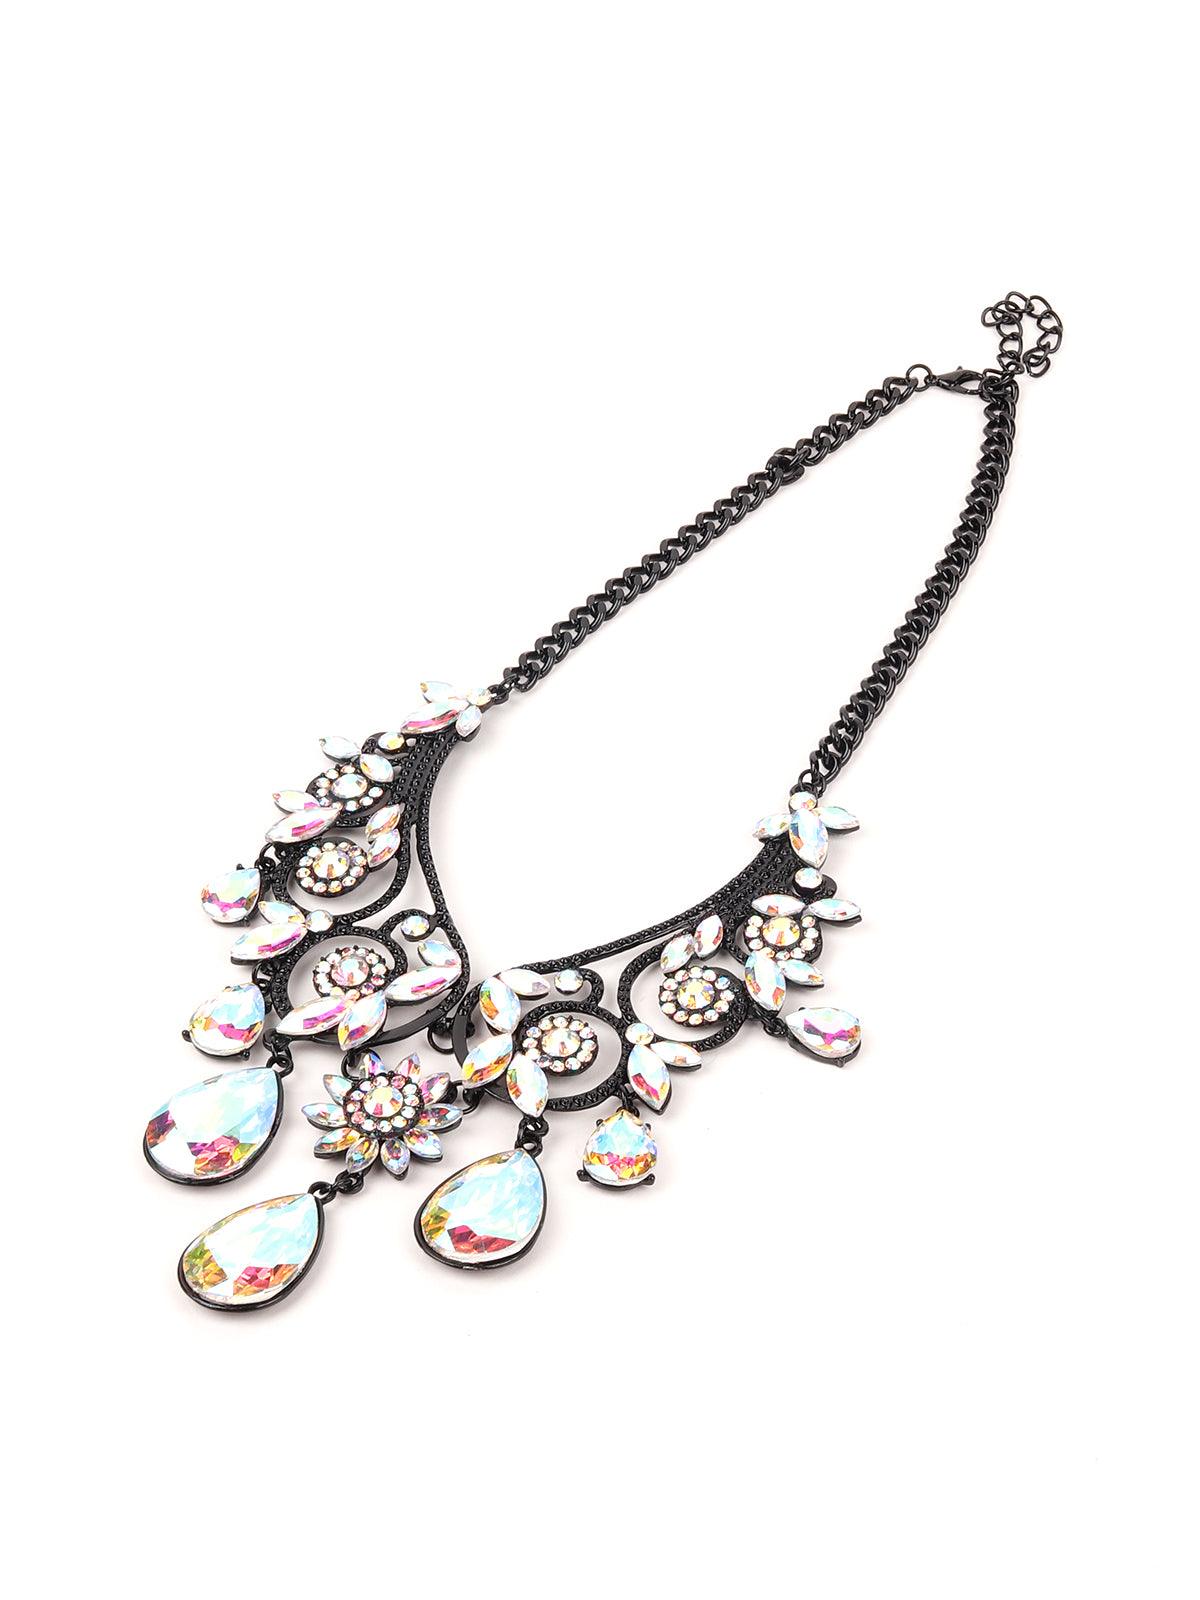 Floral Necklace With Reflective Rhine Stone Droppings - Odette